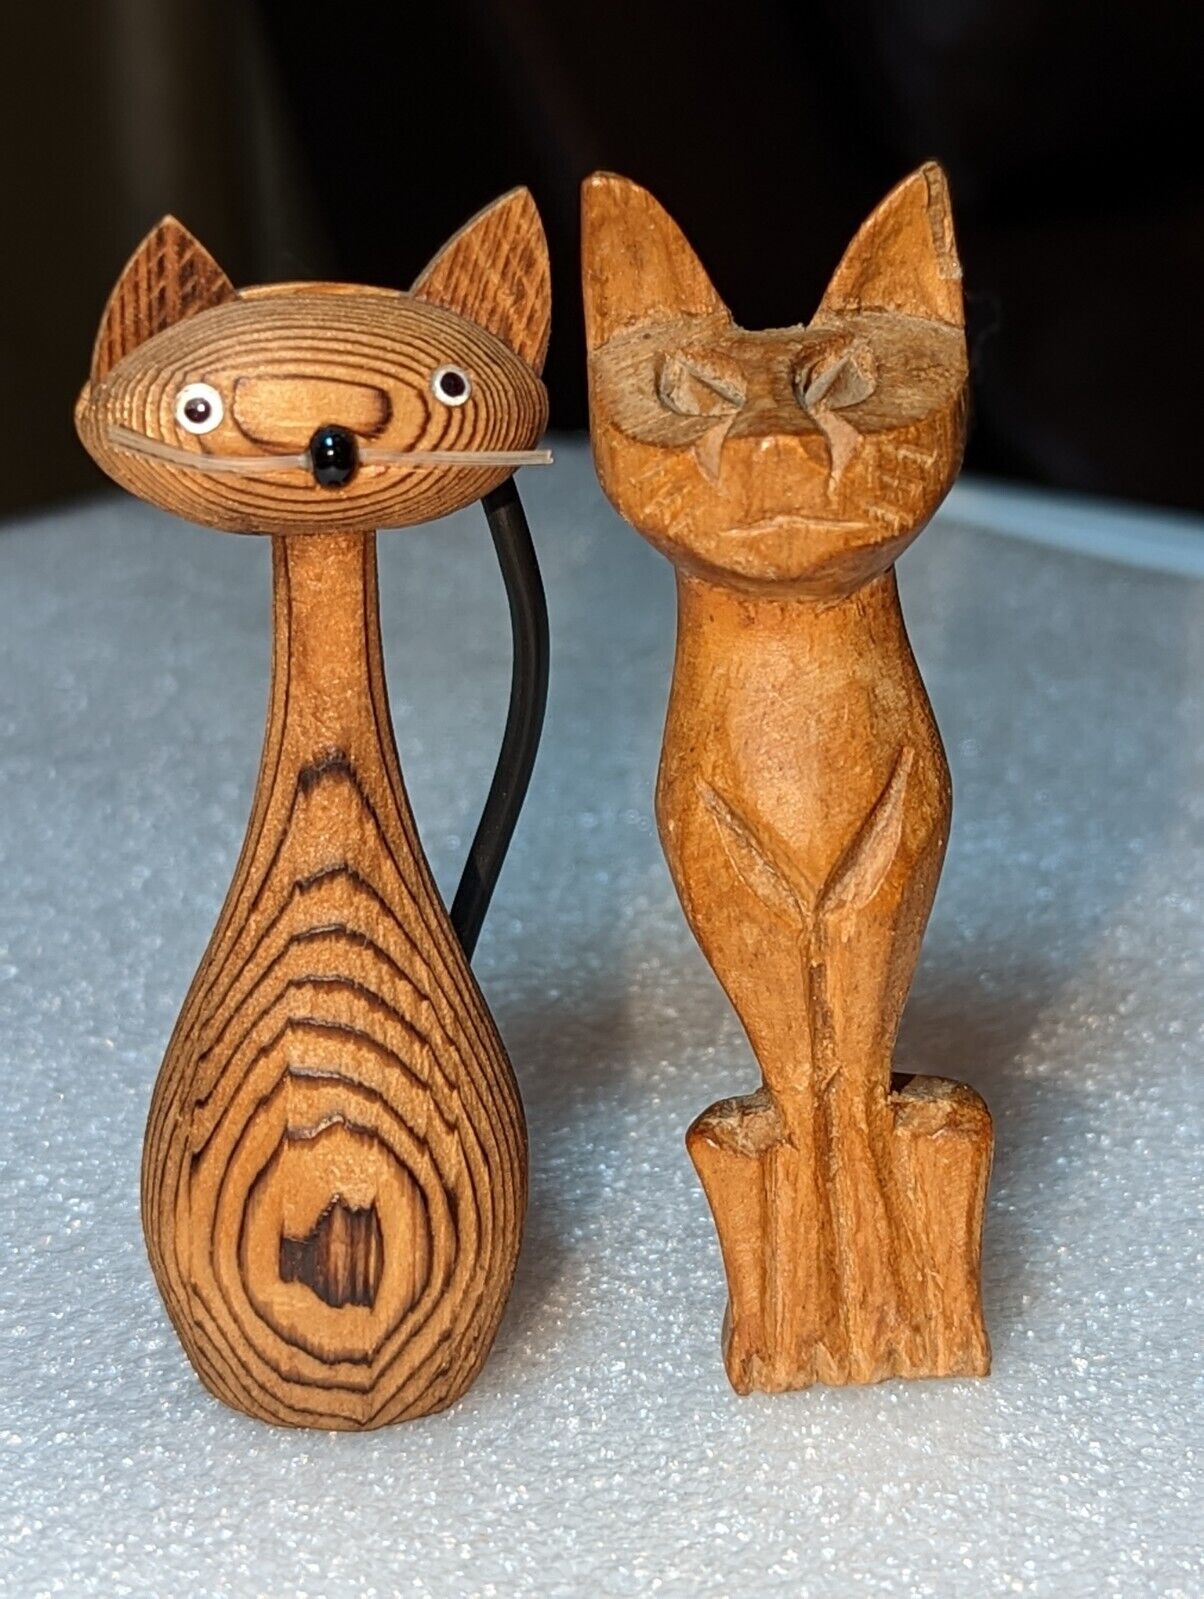 Vintage Lot 2 Handcrafted Wooden Kitty Cat Figurines 3.5